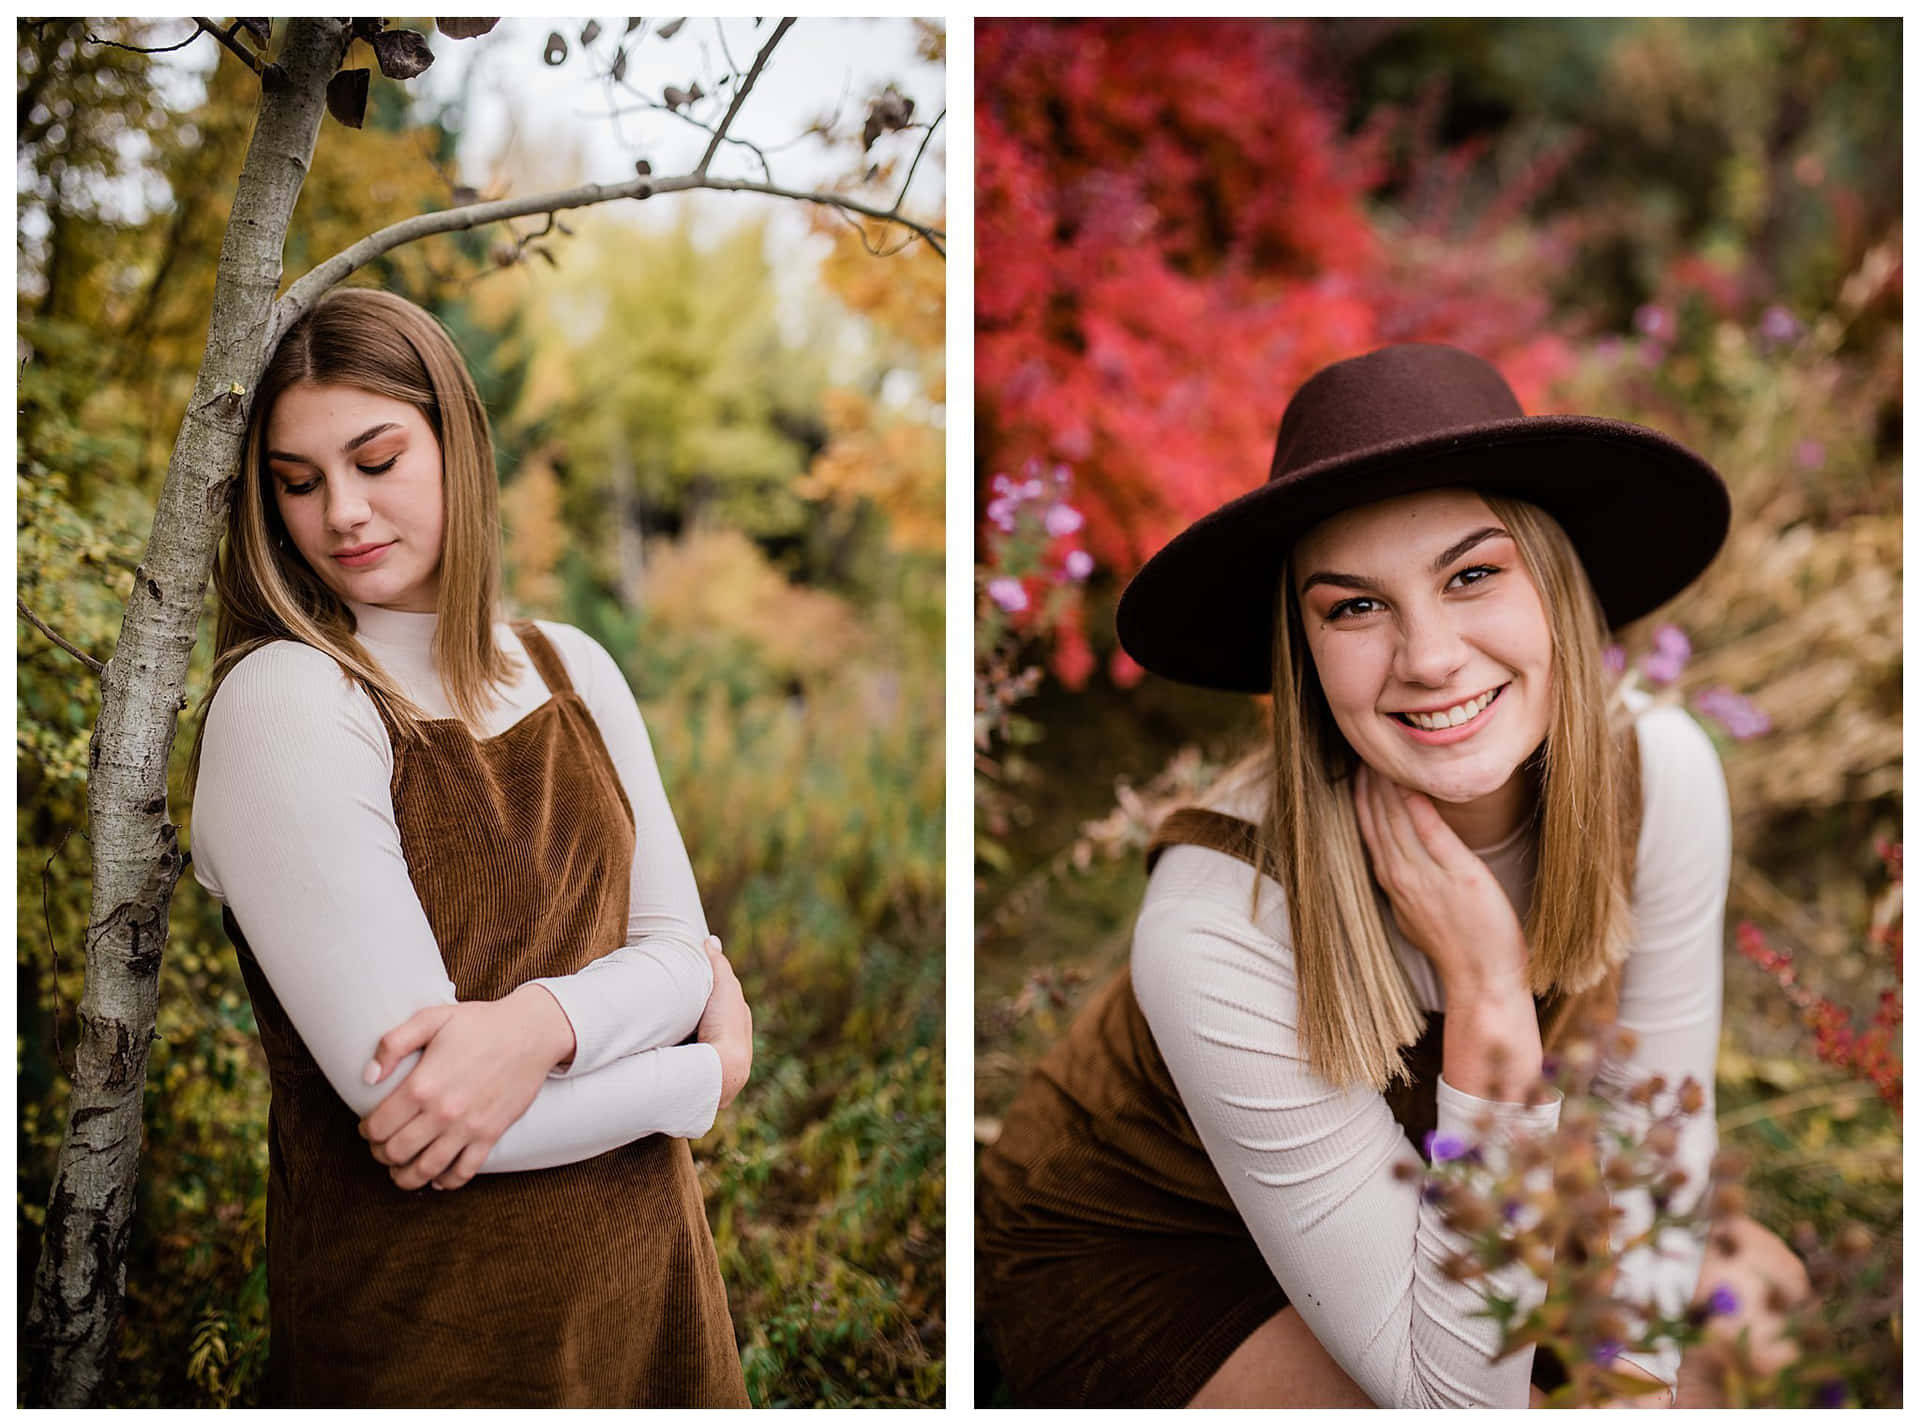 A beautiful day for a Fall Senior photoshoot